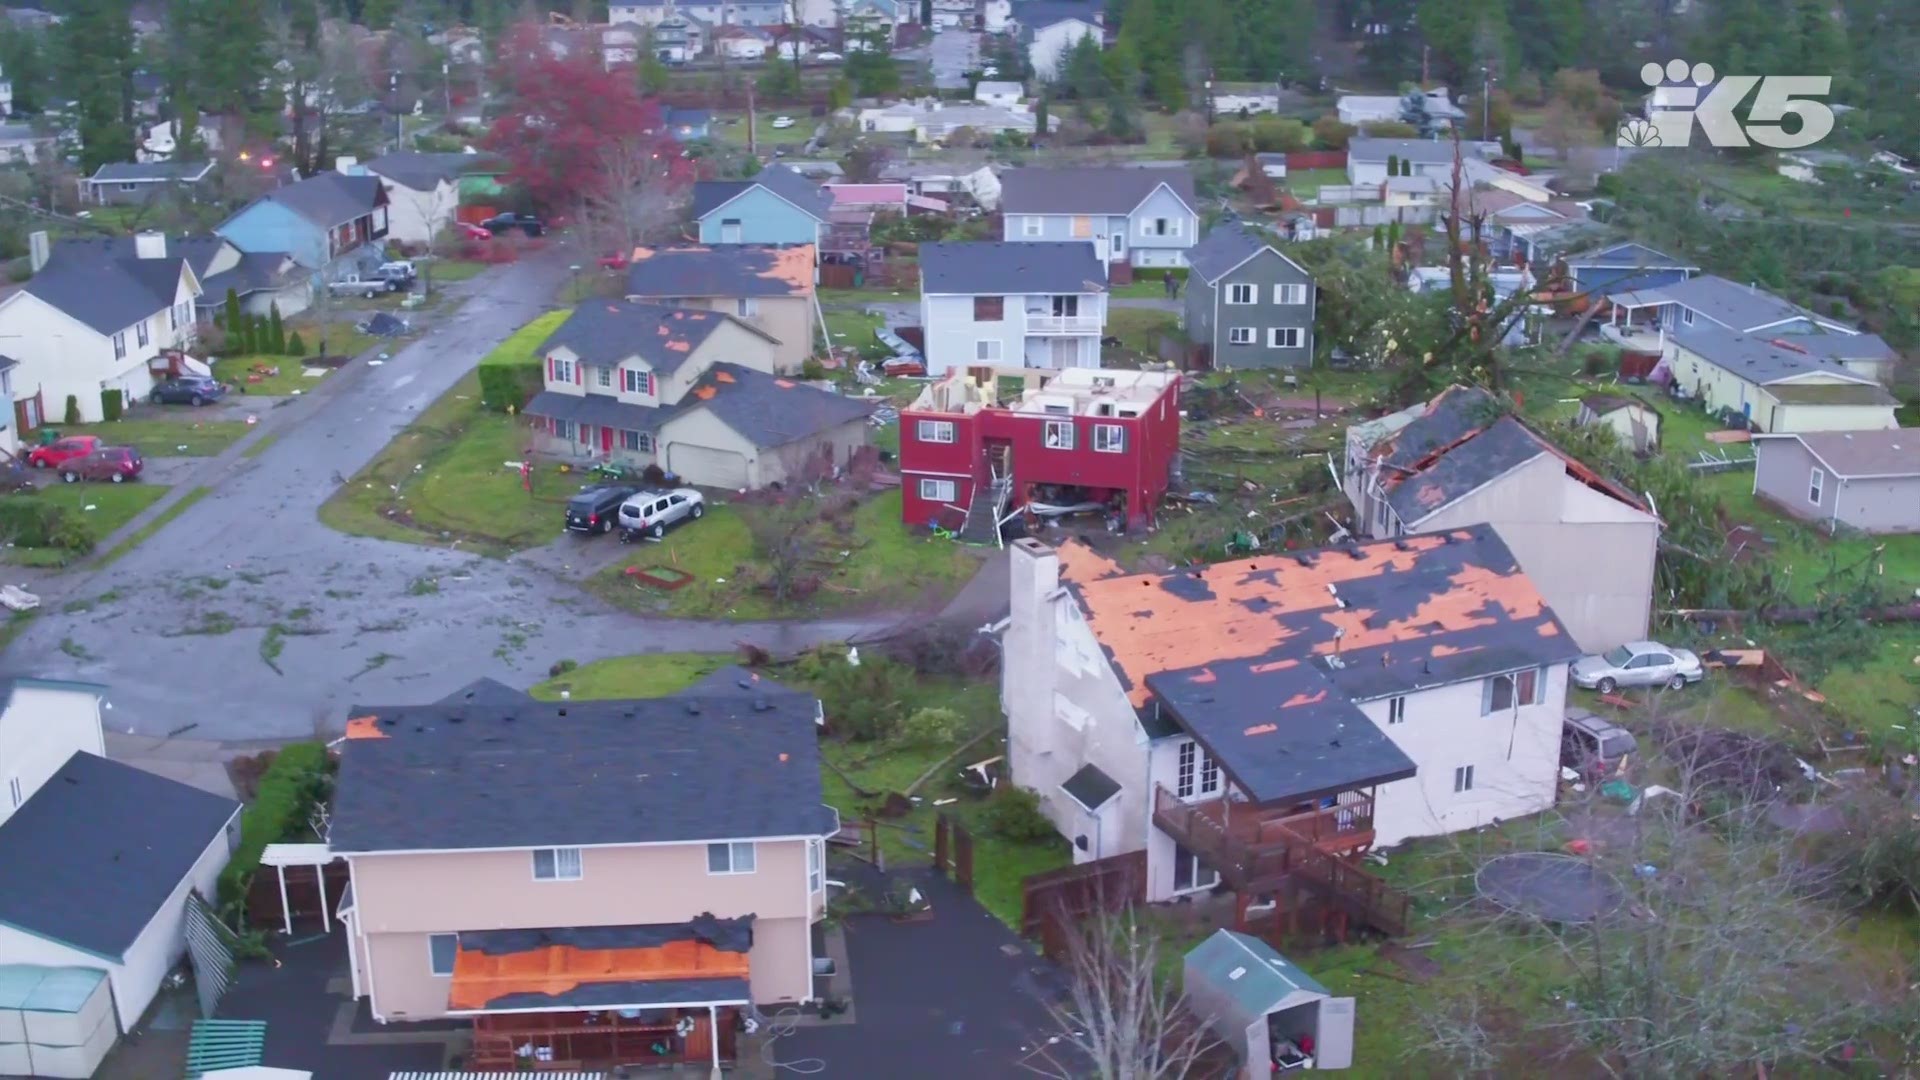 Drone footage shows damage to homes and structures after a tornado swept through Port Orchard on Tuesday.